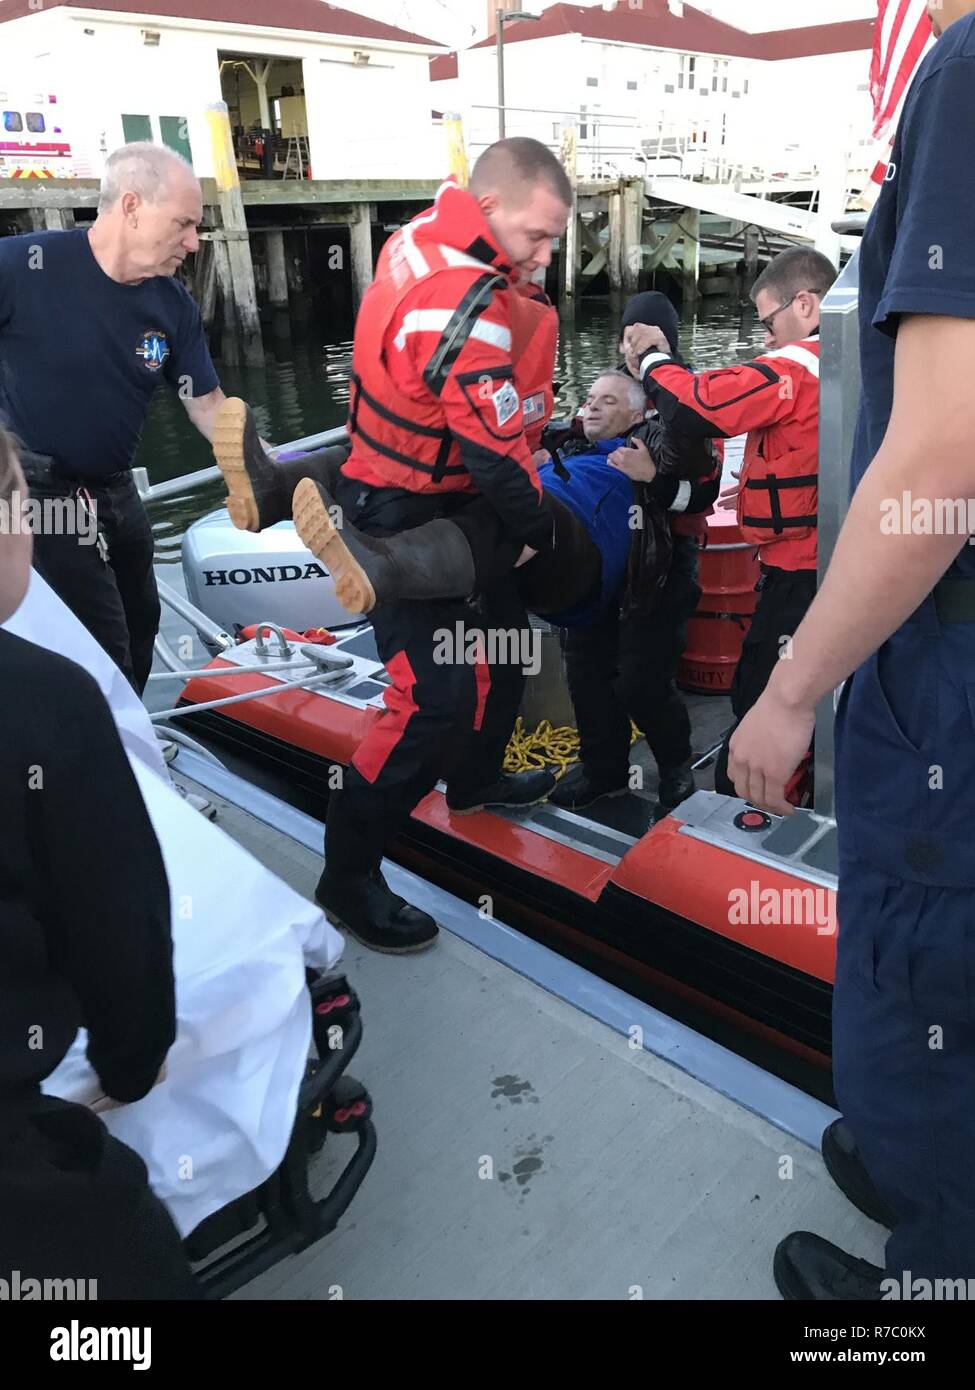 NEW YORK - Coast Guard crewmembers from Station Fire Island help transfer a man they rescued to Emergency Medical Service personnel on May 16, 2017, in Babylon, New York. The man overturned in his kayak and spent over an hour clinging to a mooring buoy before the rescue crew arrived on scene. Stock Photo